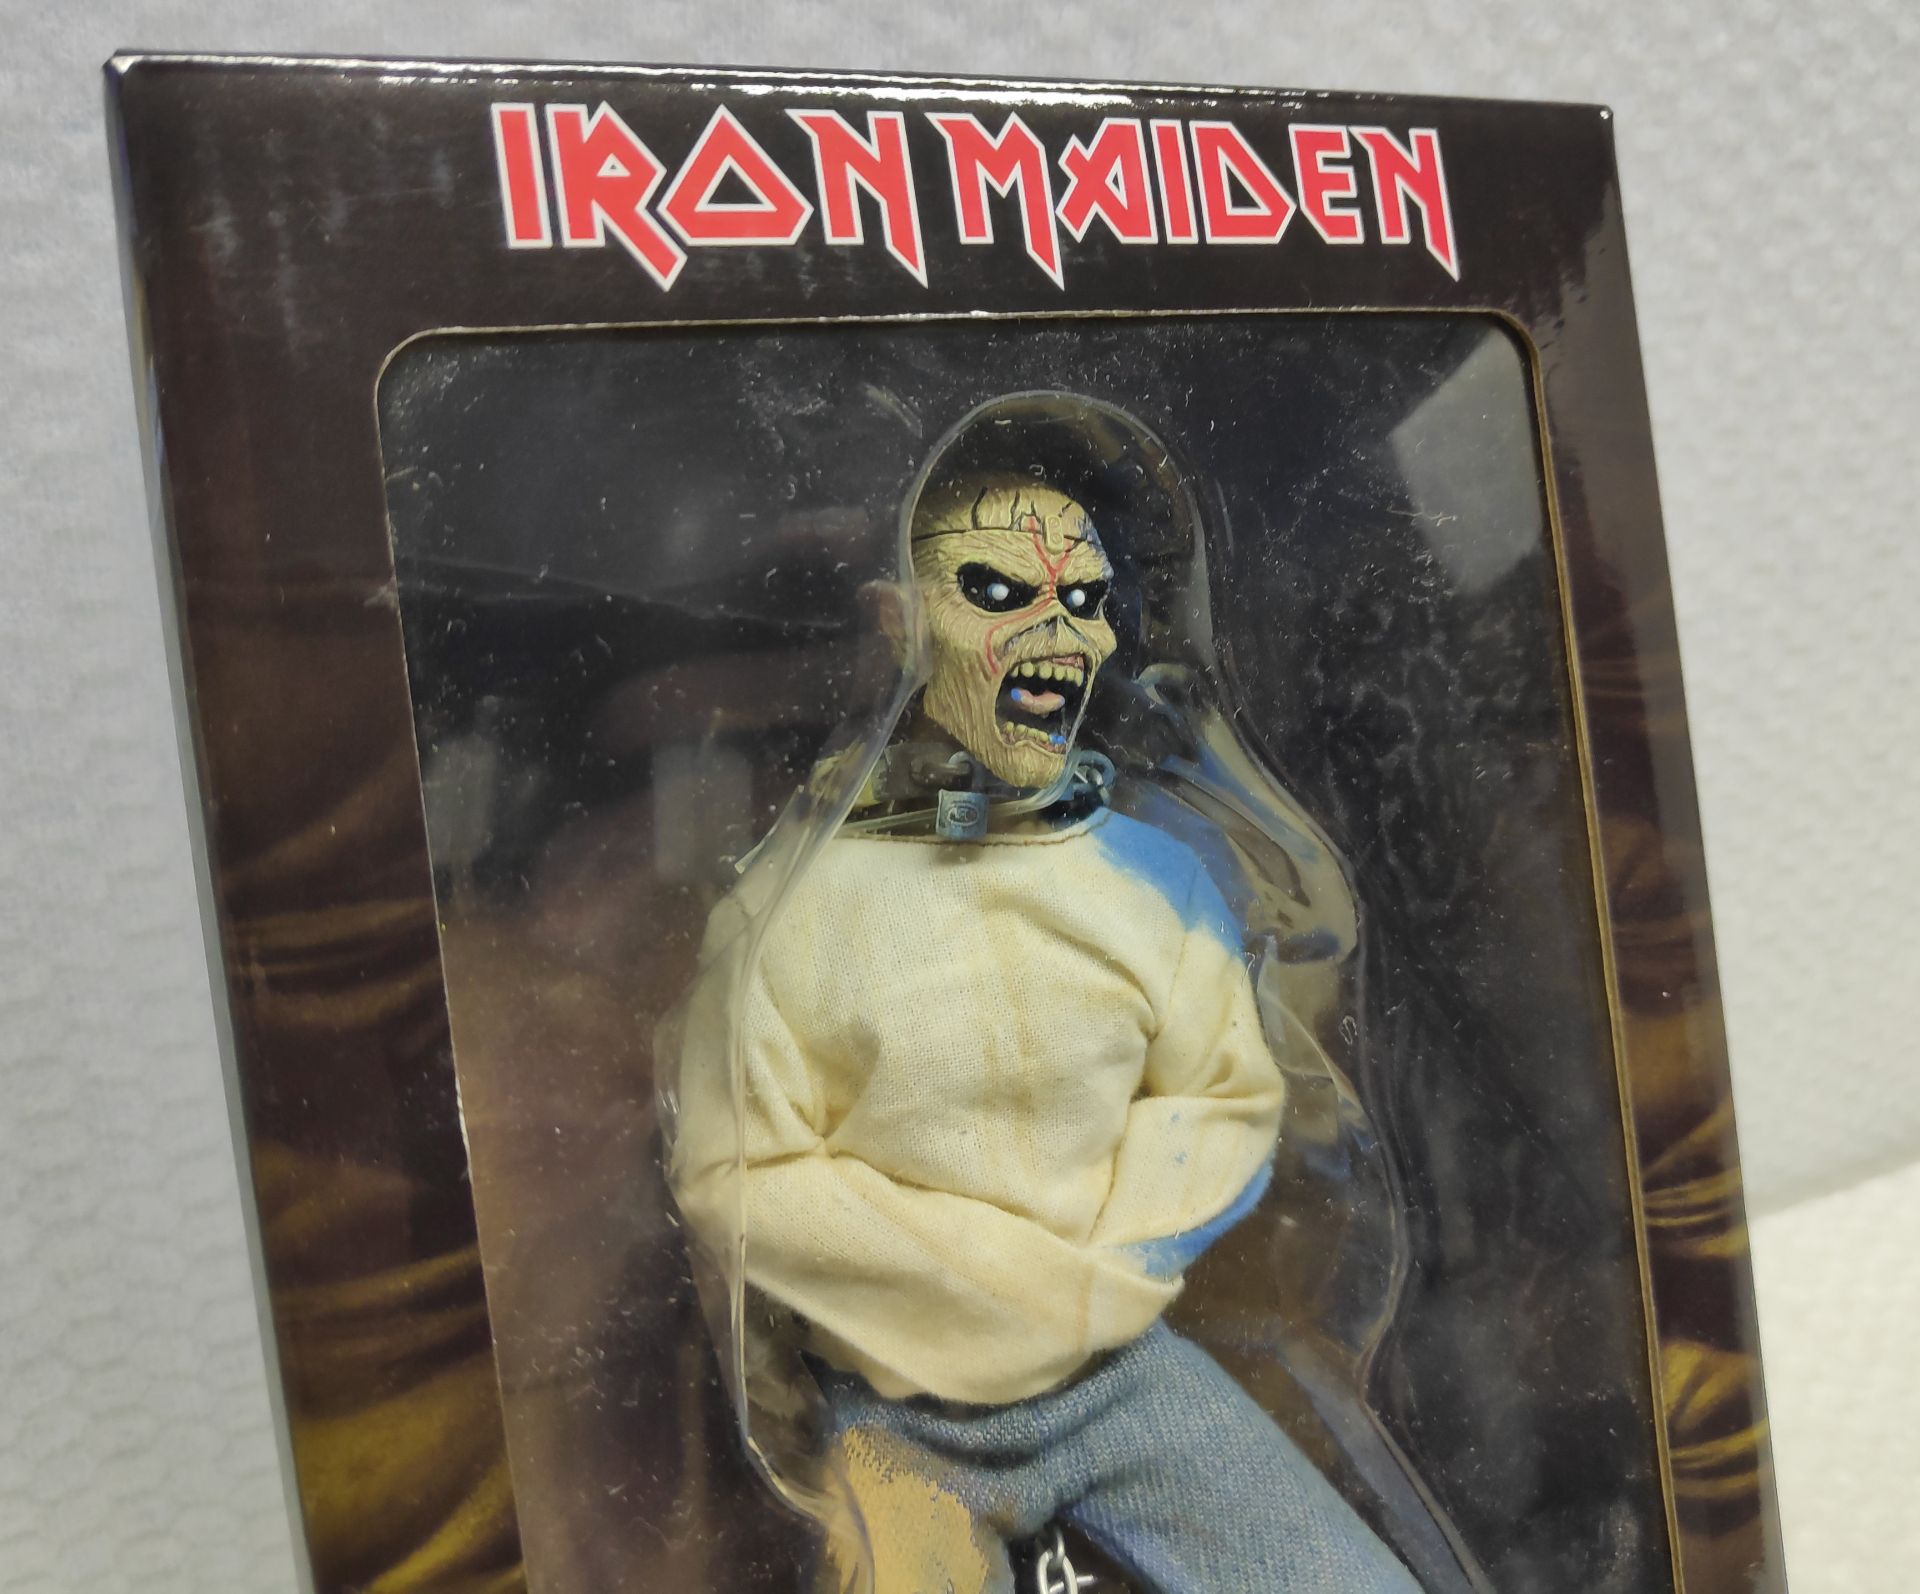 1 x Iron Maiden Eddie Piece of Mind NECA Action Figure - New/Boxed - HTYS166 - CL720 - Location: Alt - Image 6 of 11